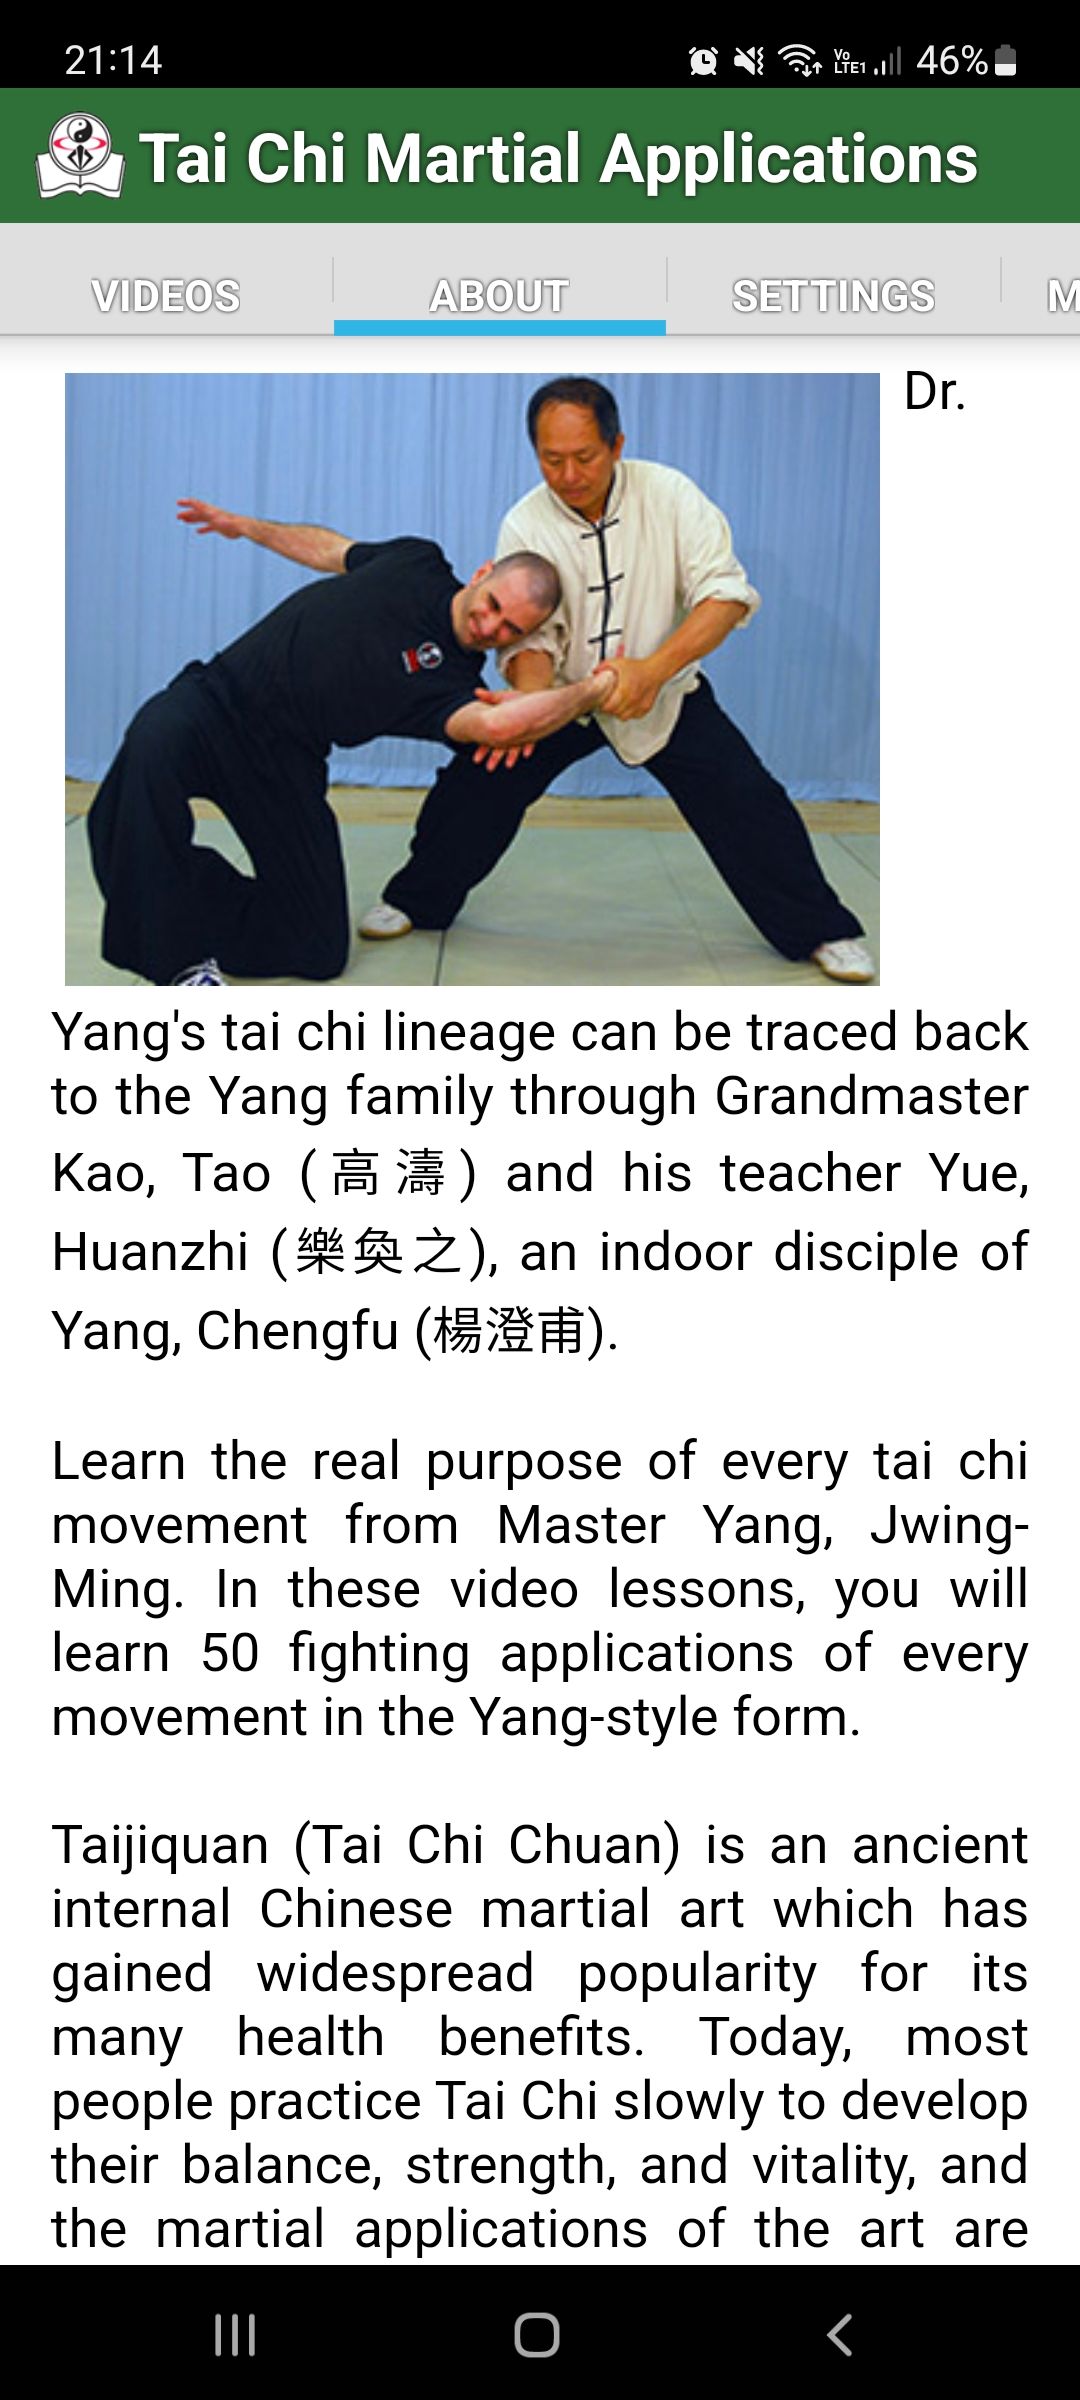 Tai Chi Martial Applications mobile app about